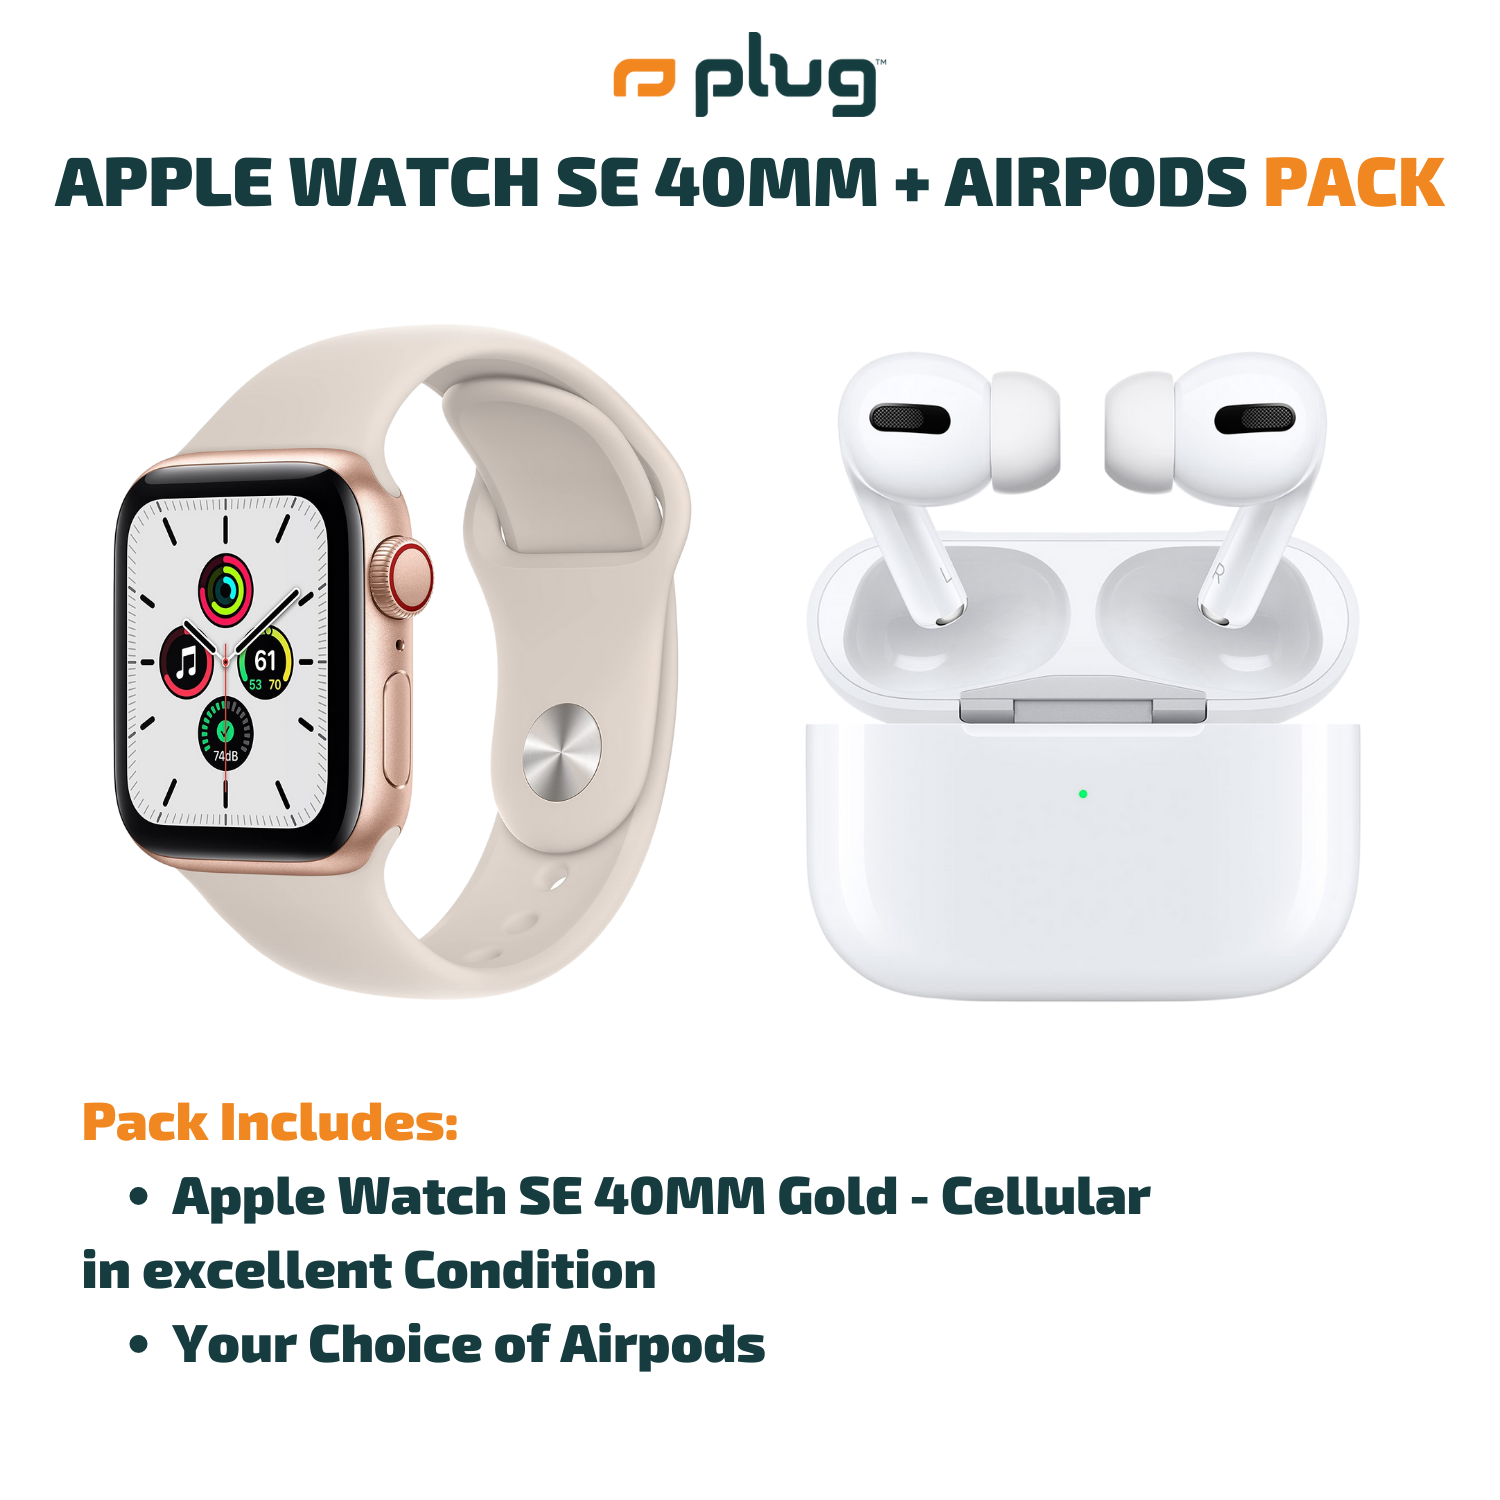 Apple Watch SE 40MM + Pack Airpods